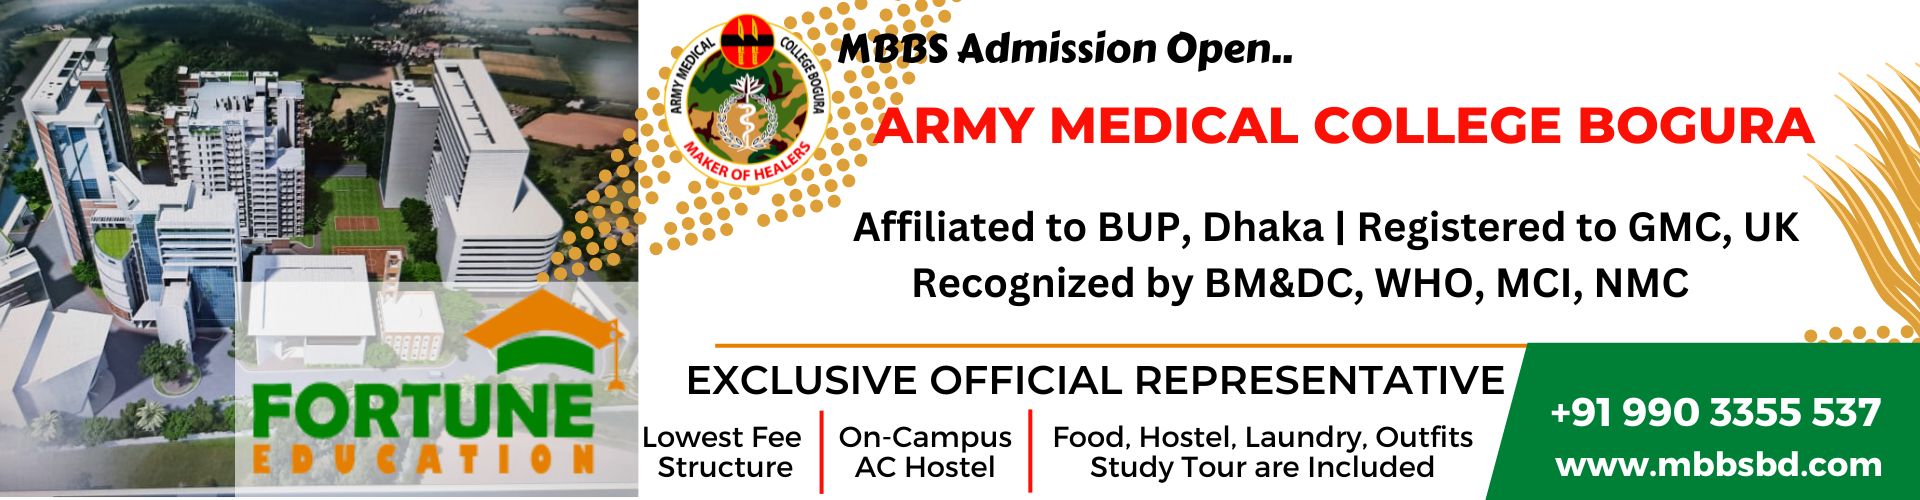 MBBS Admission Dates NEET Merit Counselling